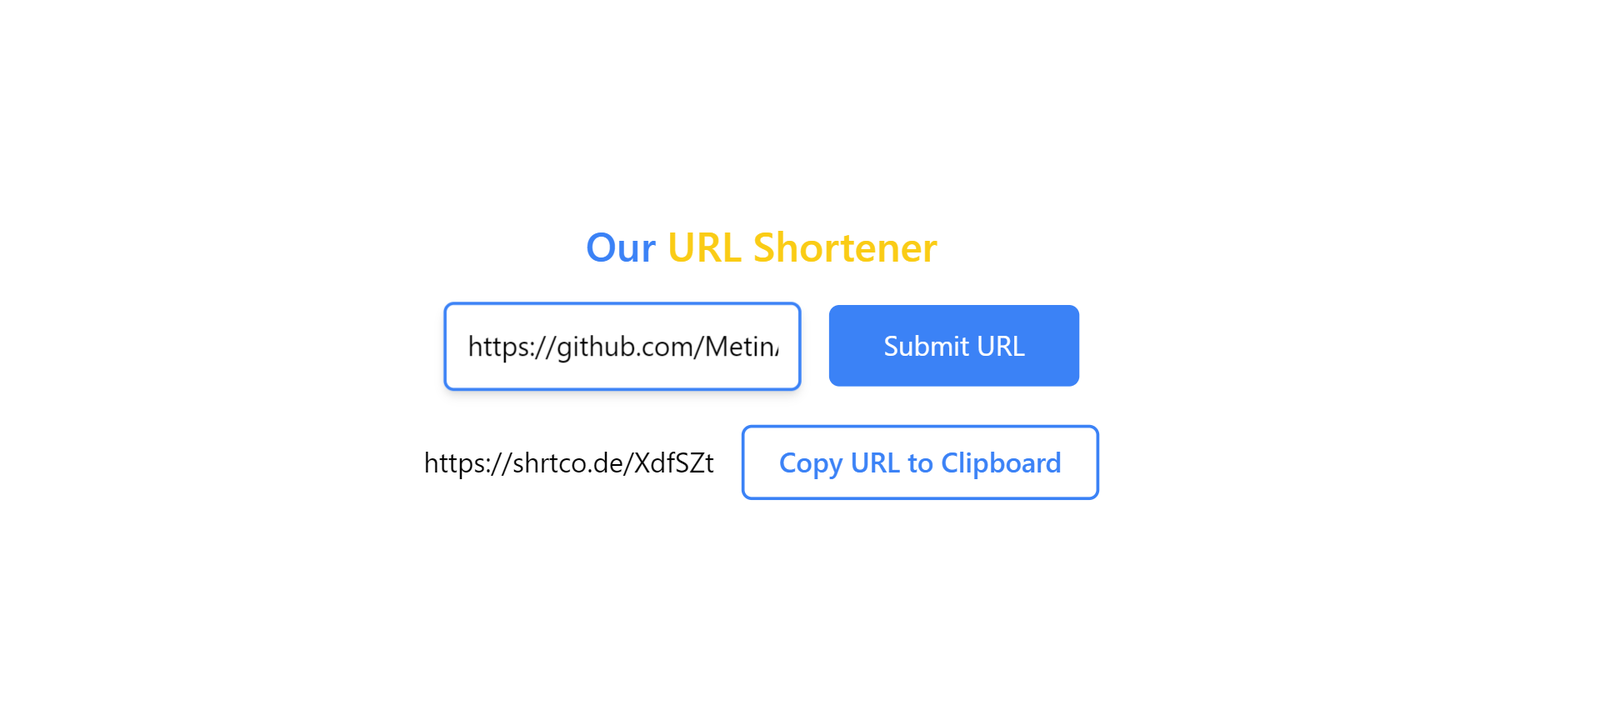 shortened URL and Copy to clipboard button